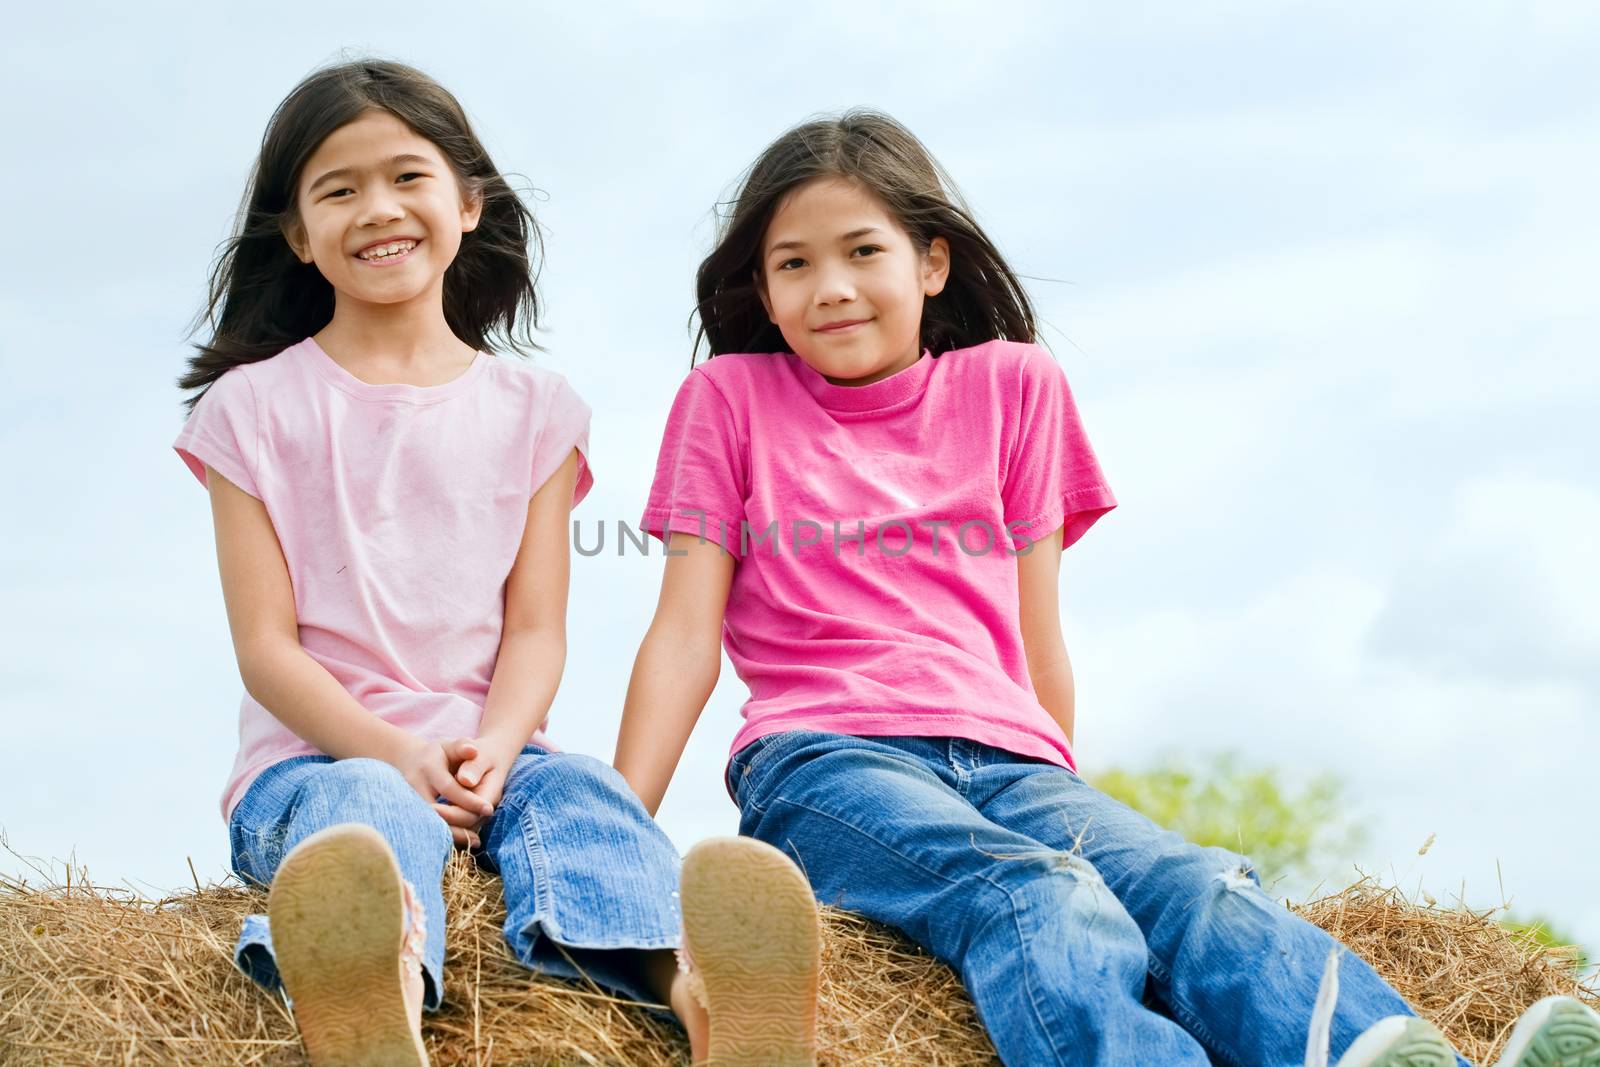 two young girls sitting on top of haybale